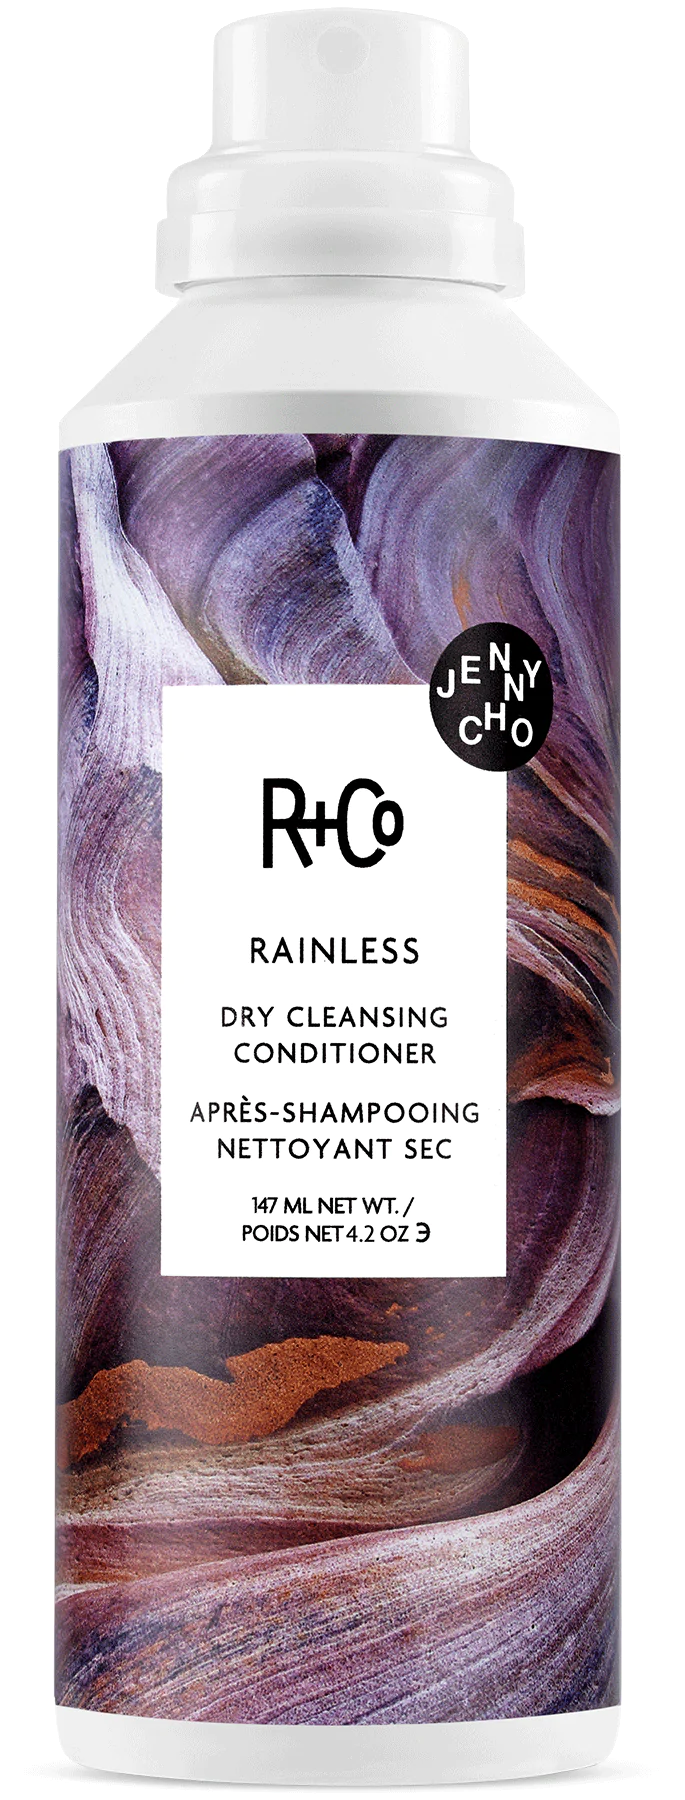 Rainless: Dry Cleansing Conditioner